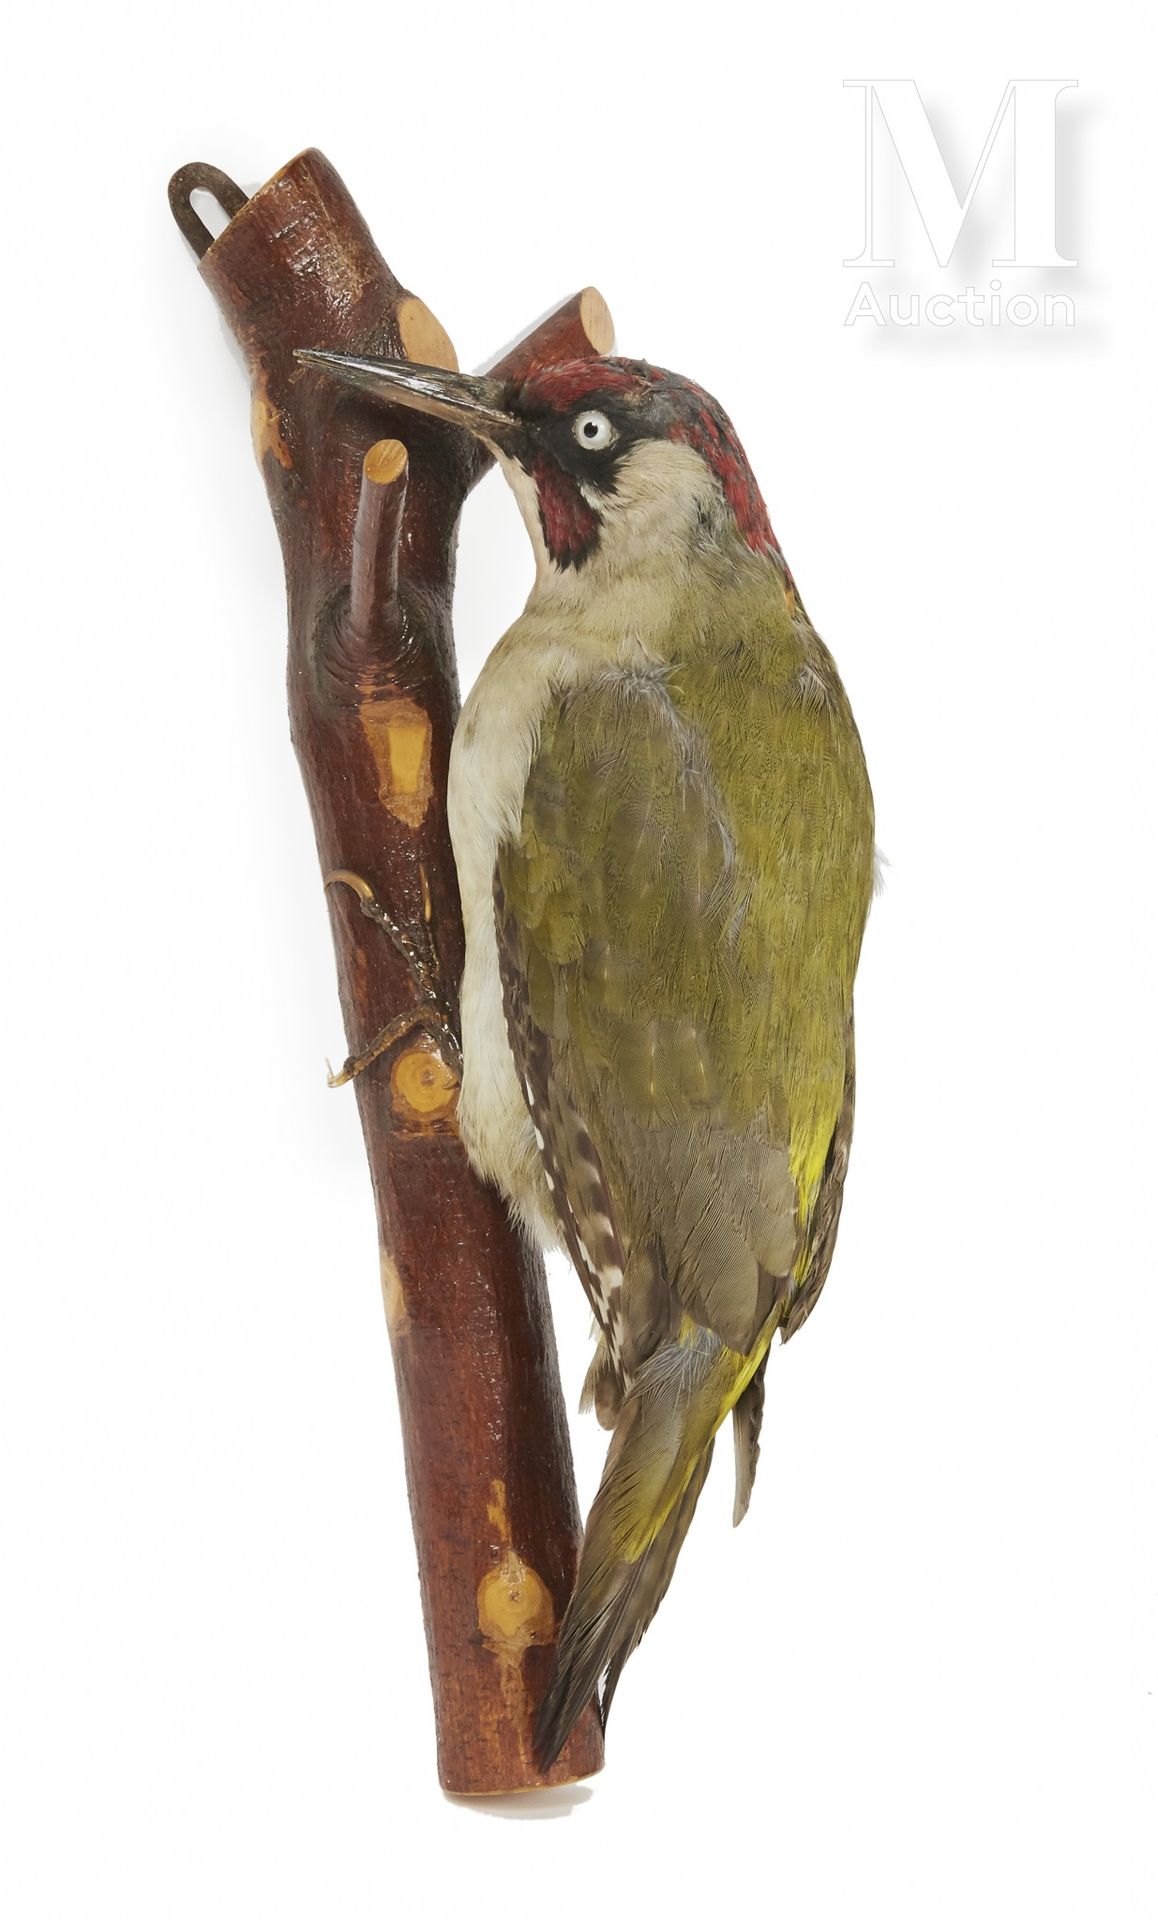 PIC VERT To be fixed to the wall.

Picus viridis



Provenance

Joseph Védrine C&hellip;